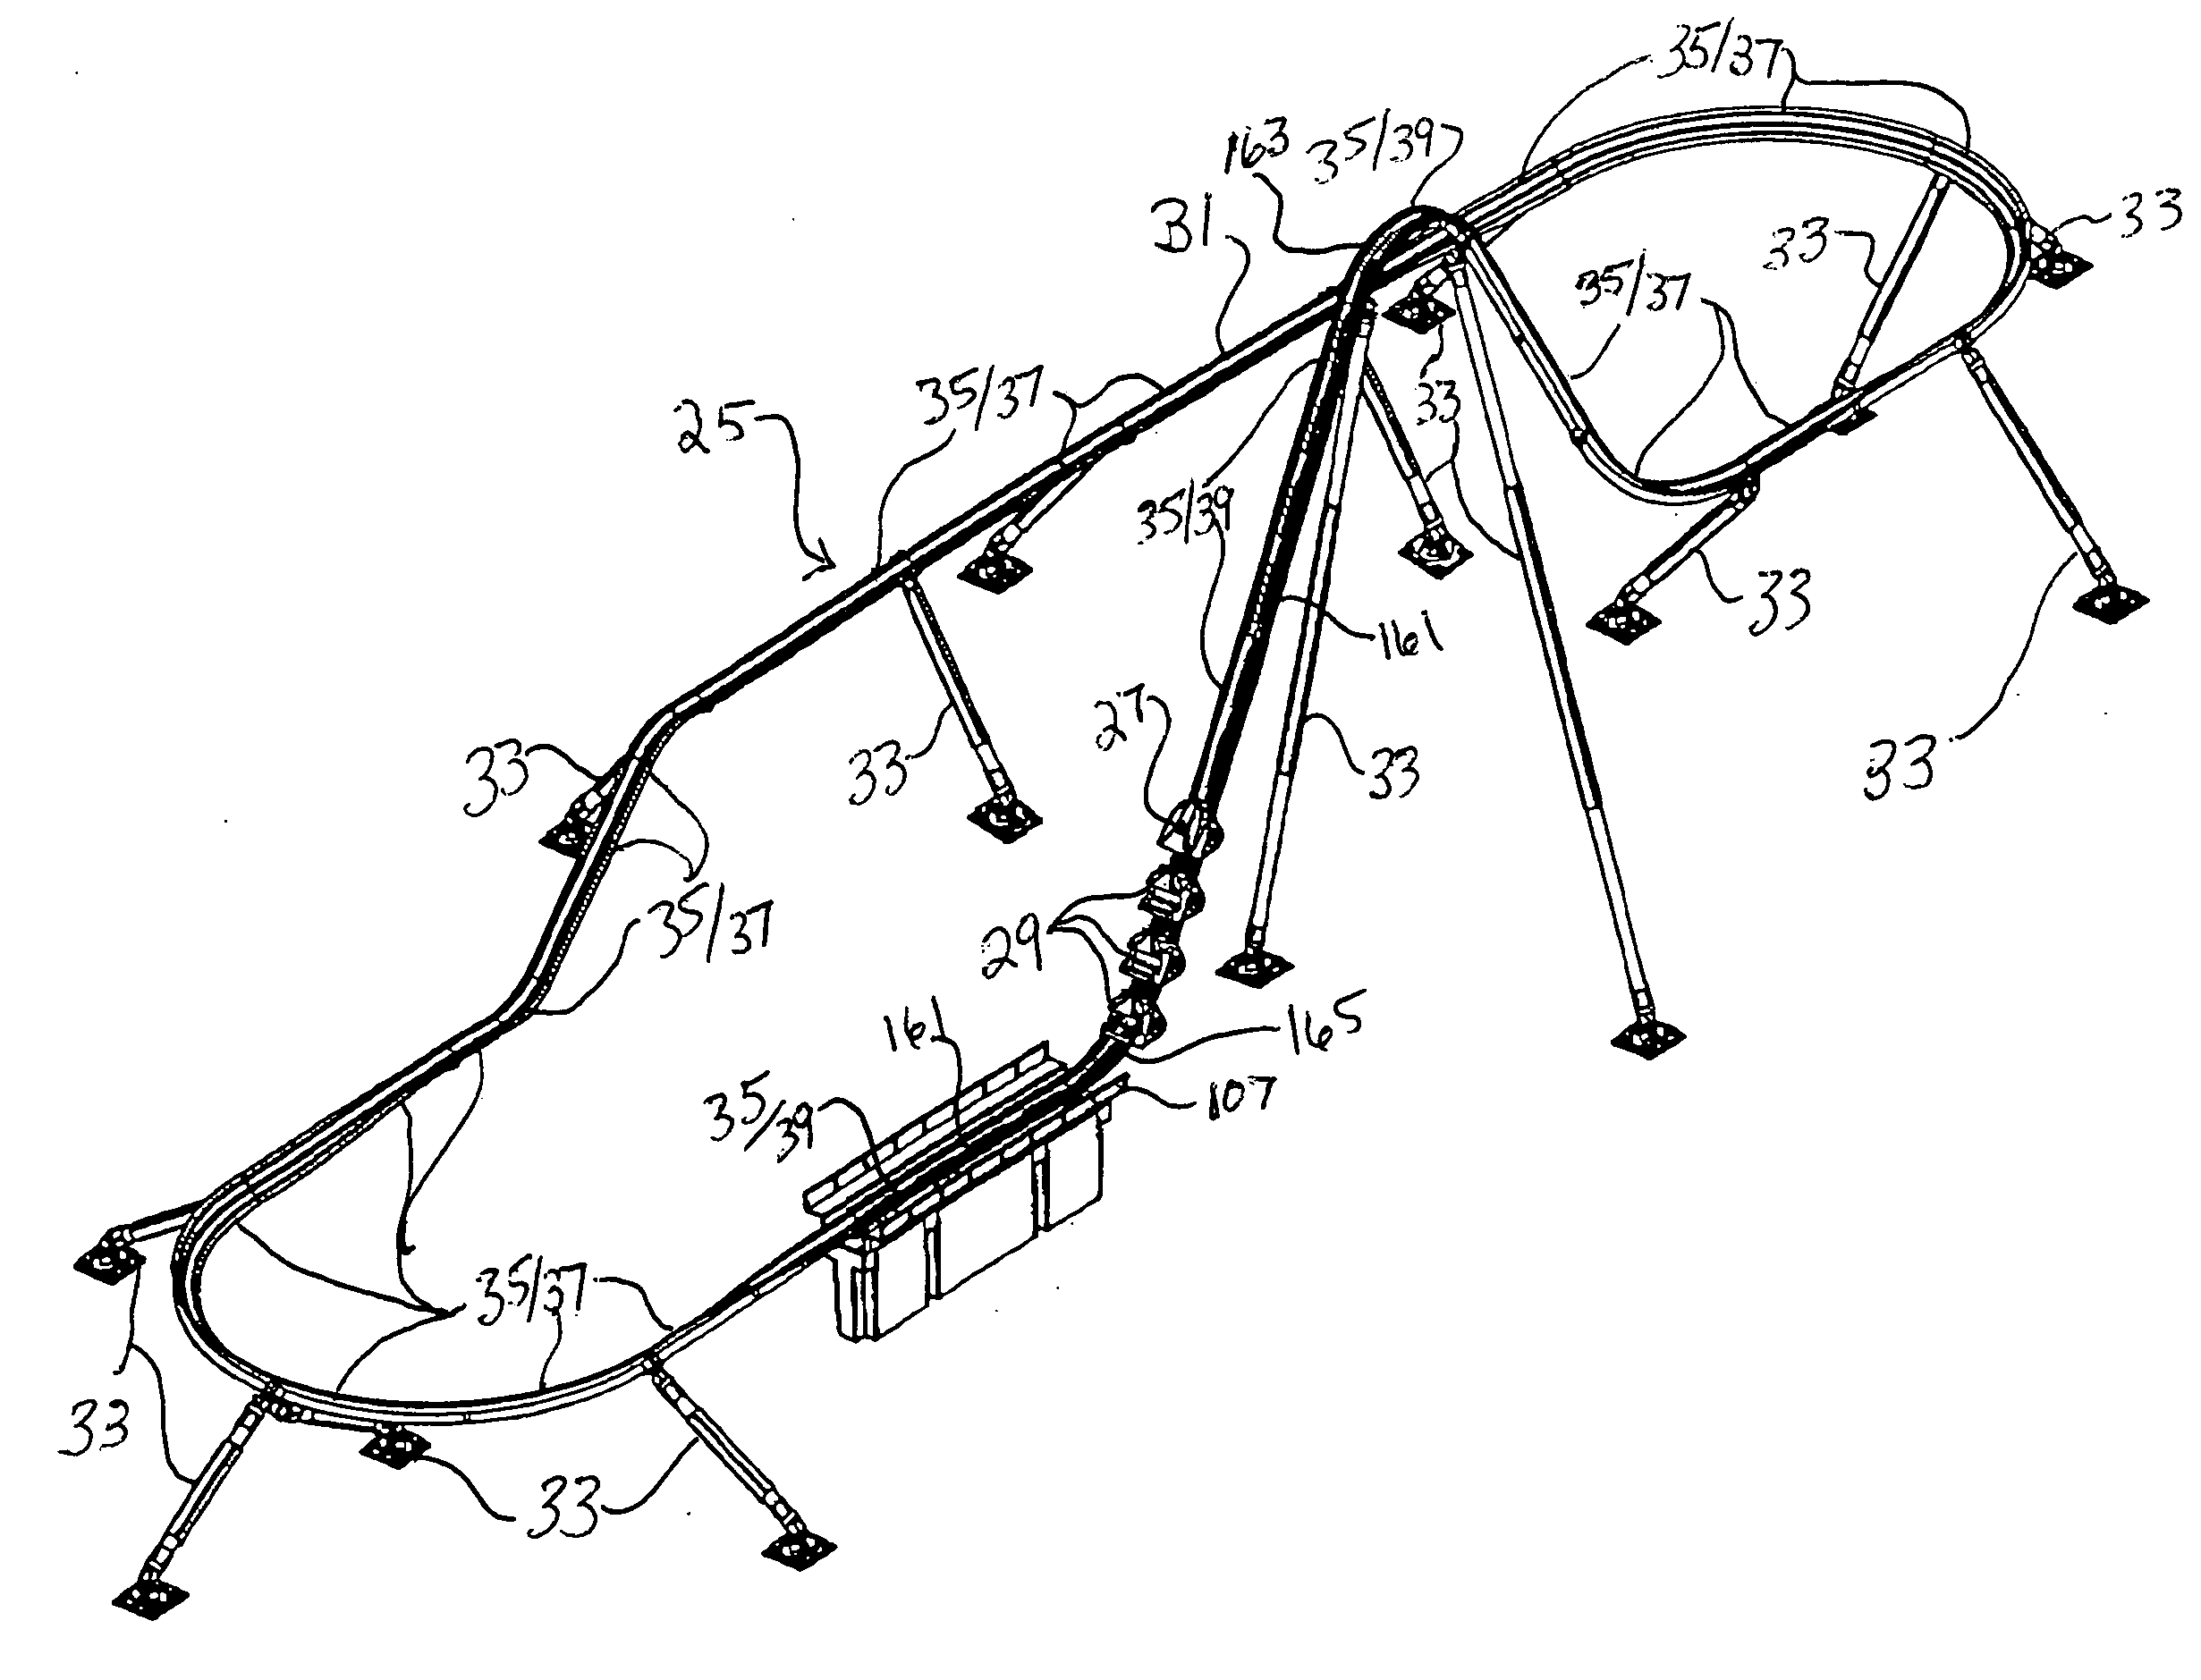 Track and vehicle amusement apparatus and methods